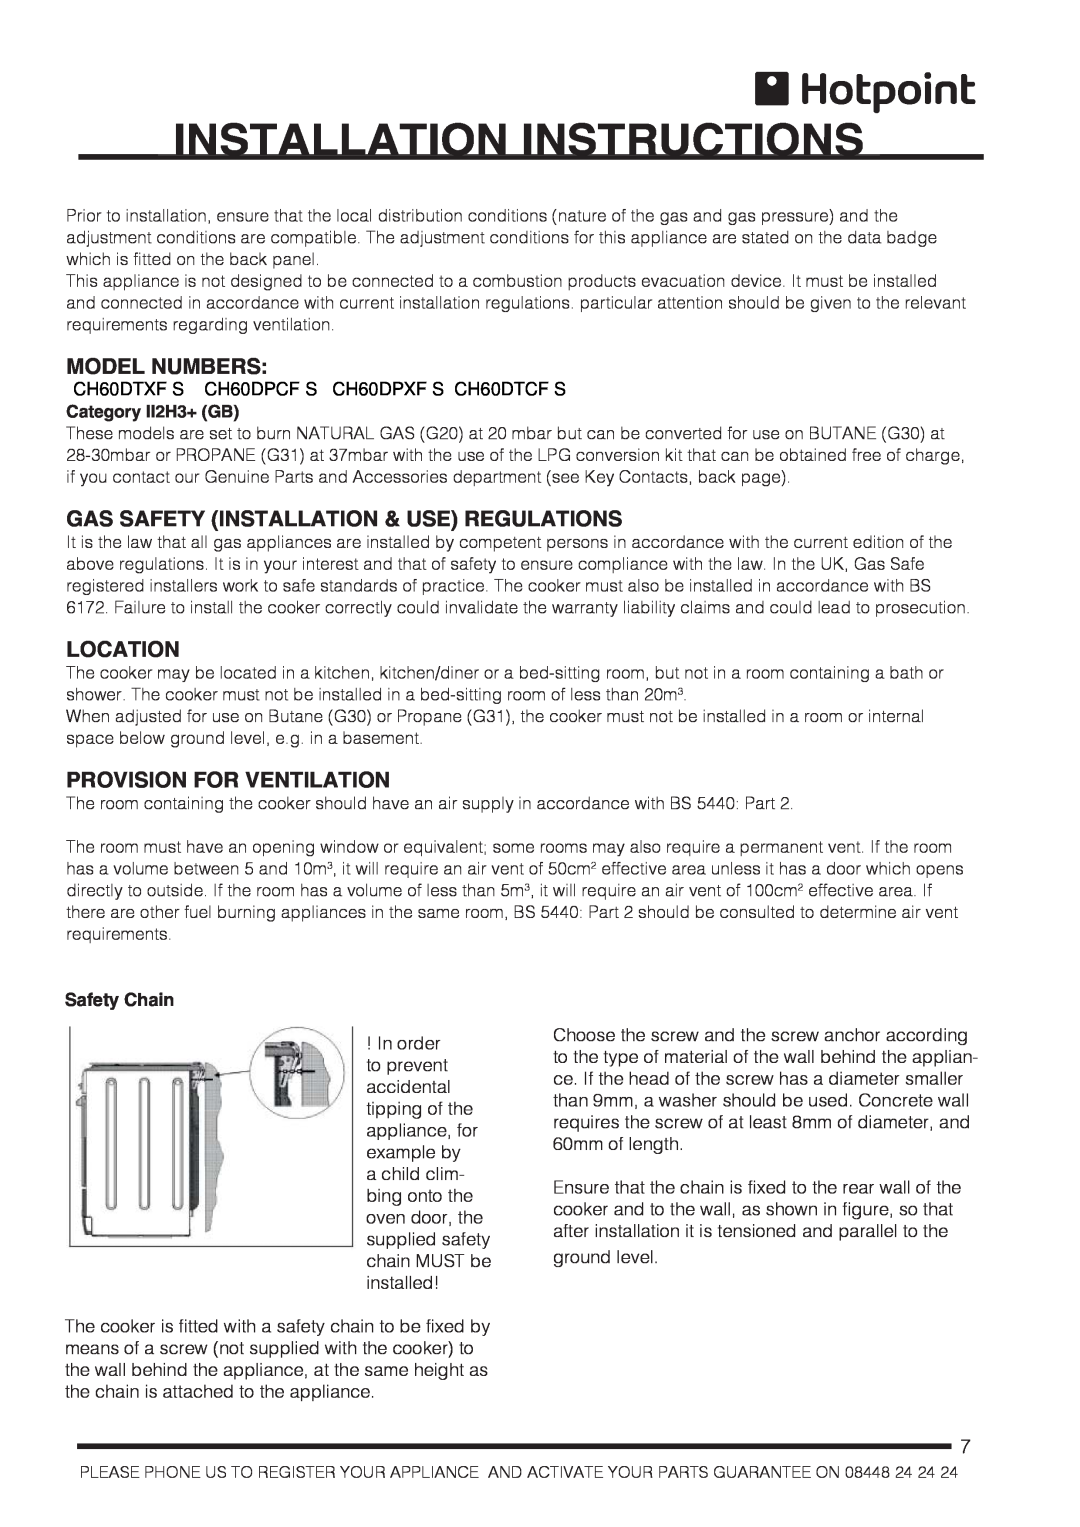 Hotpoint CH60DTXFS Installation Instructions, Model Numbers, Gas Safety Installation & Use Regulations, Location 